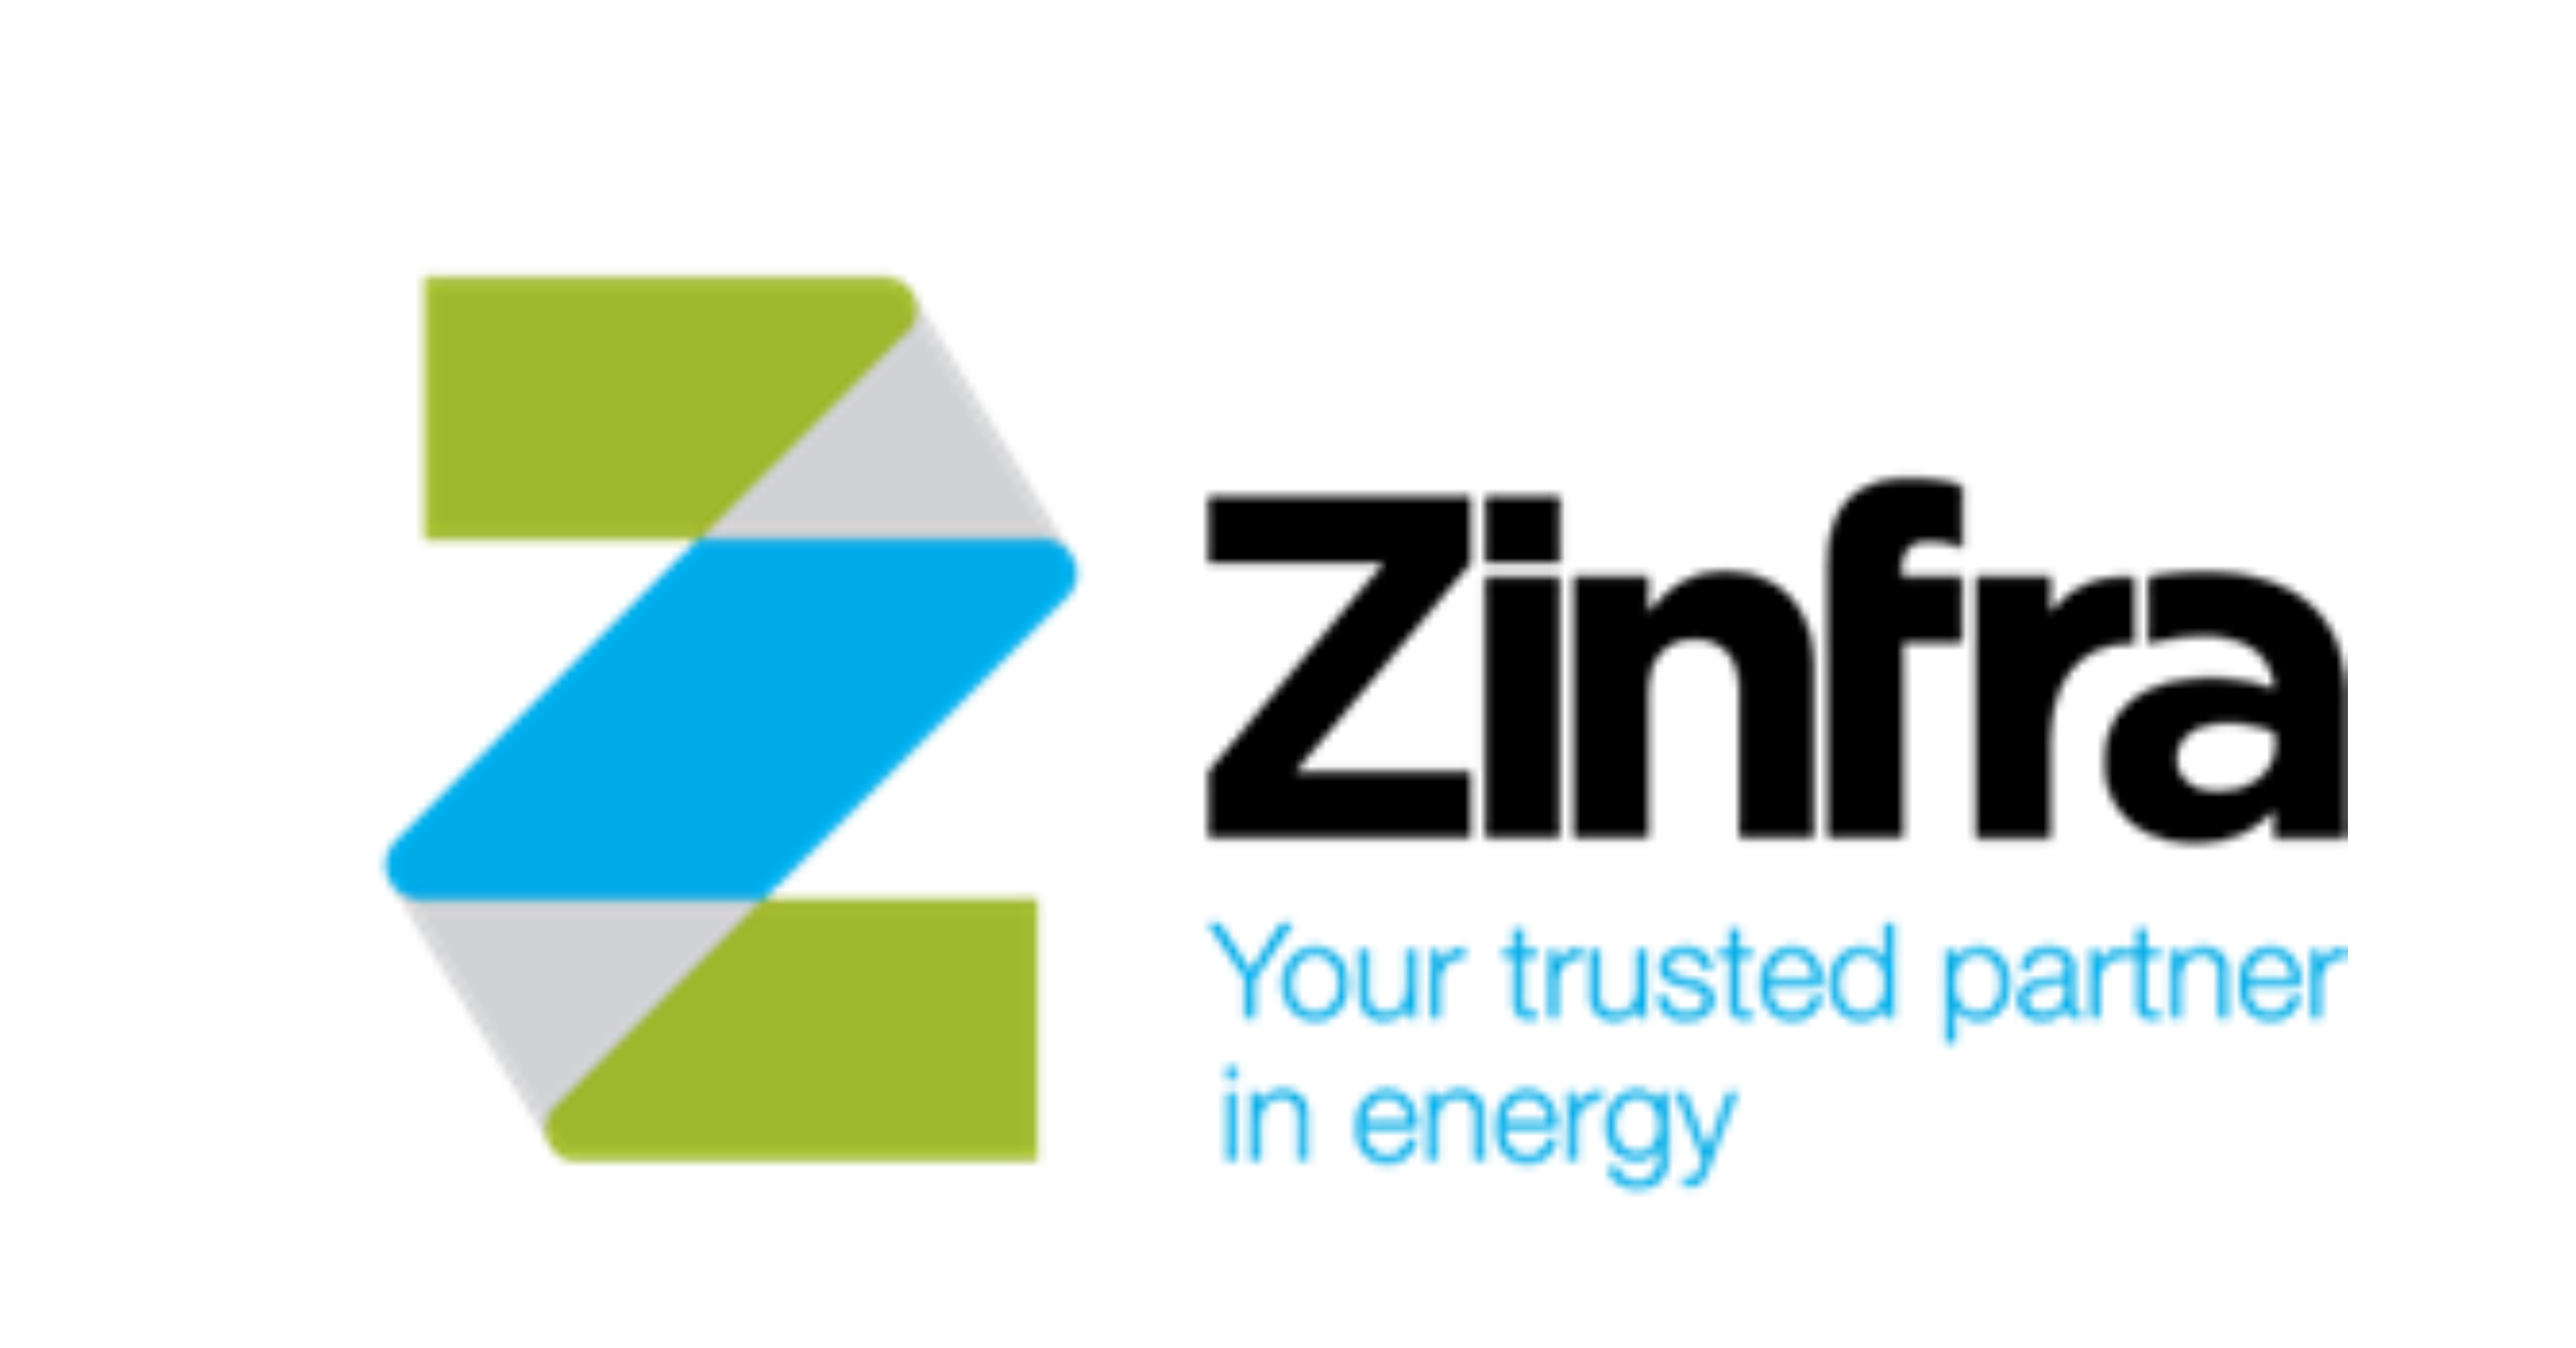 Zinfra logo, supported by Integris Group Service